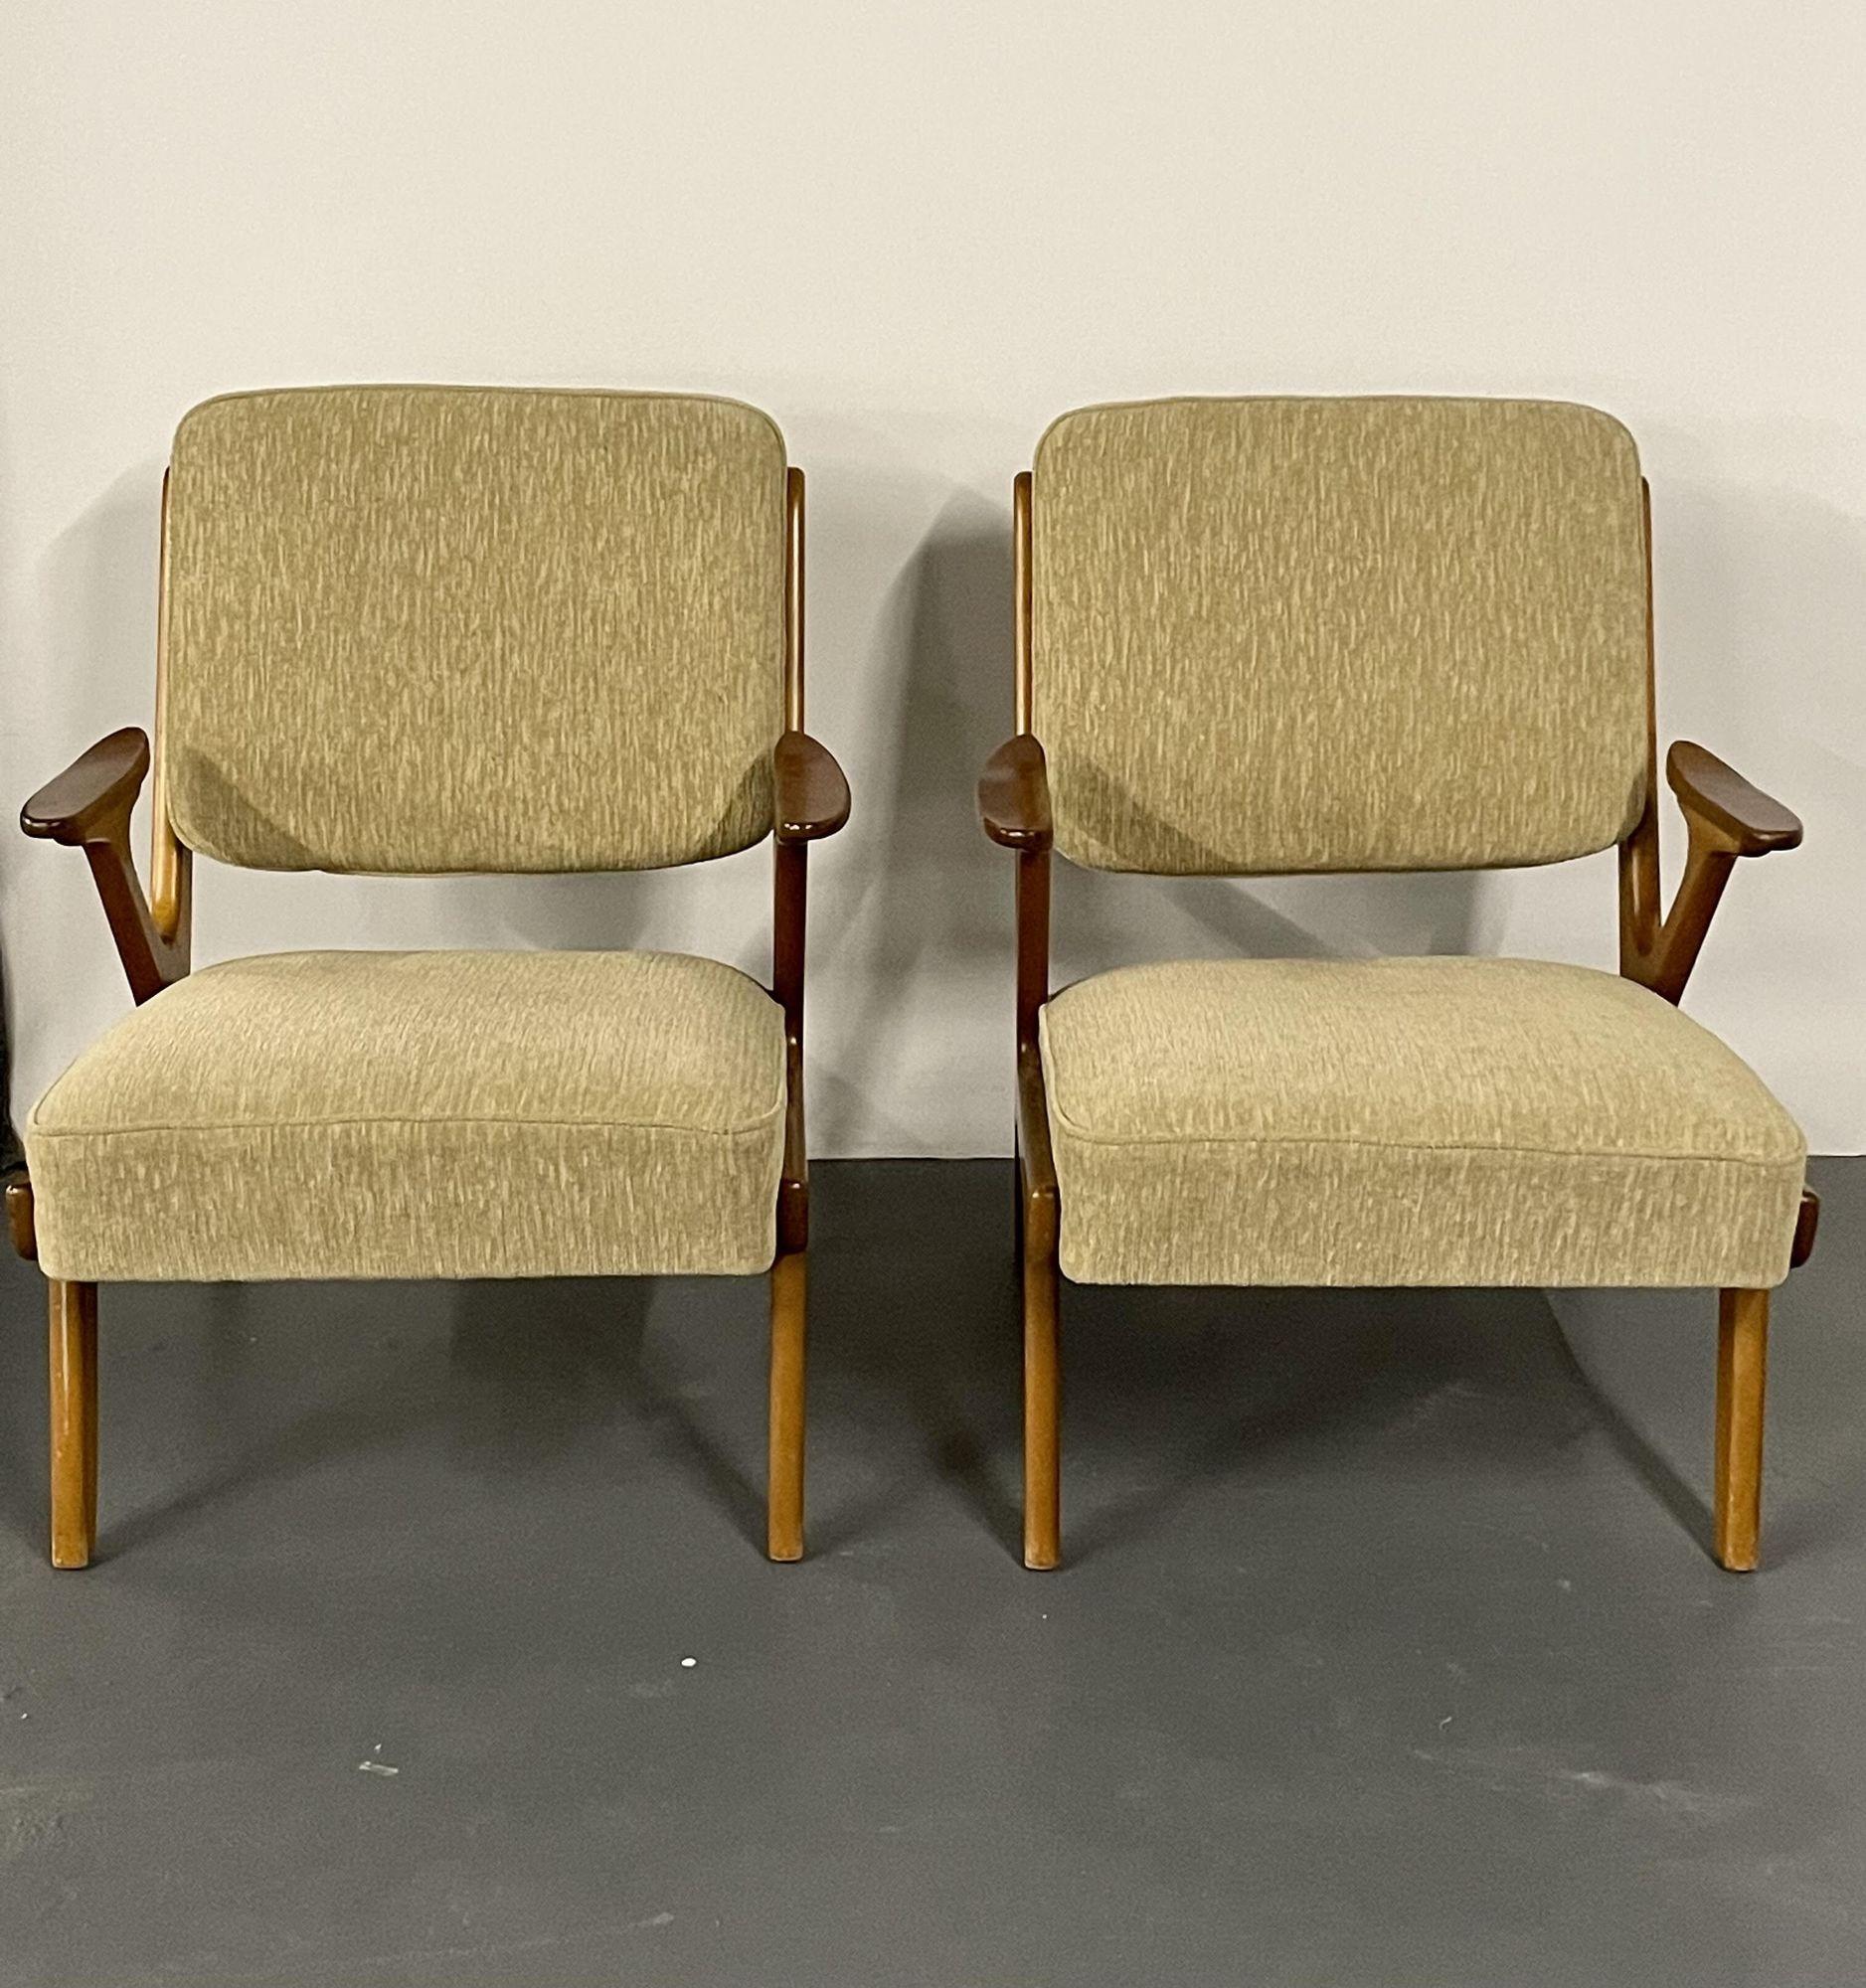 Svegards Makaryd, Mid-Century Modern, Accent Chairs, Fabric, Wood, Sweden, 1960s For Sale 1